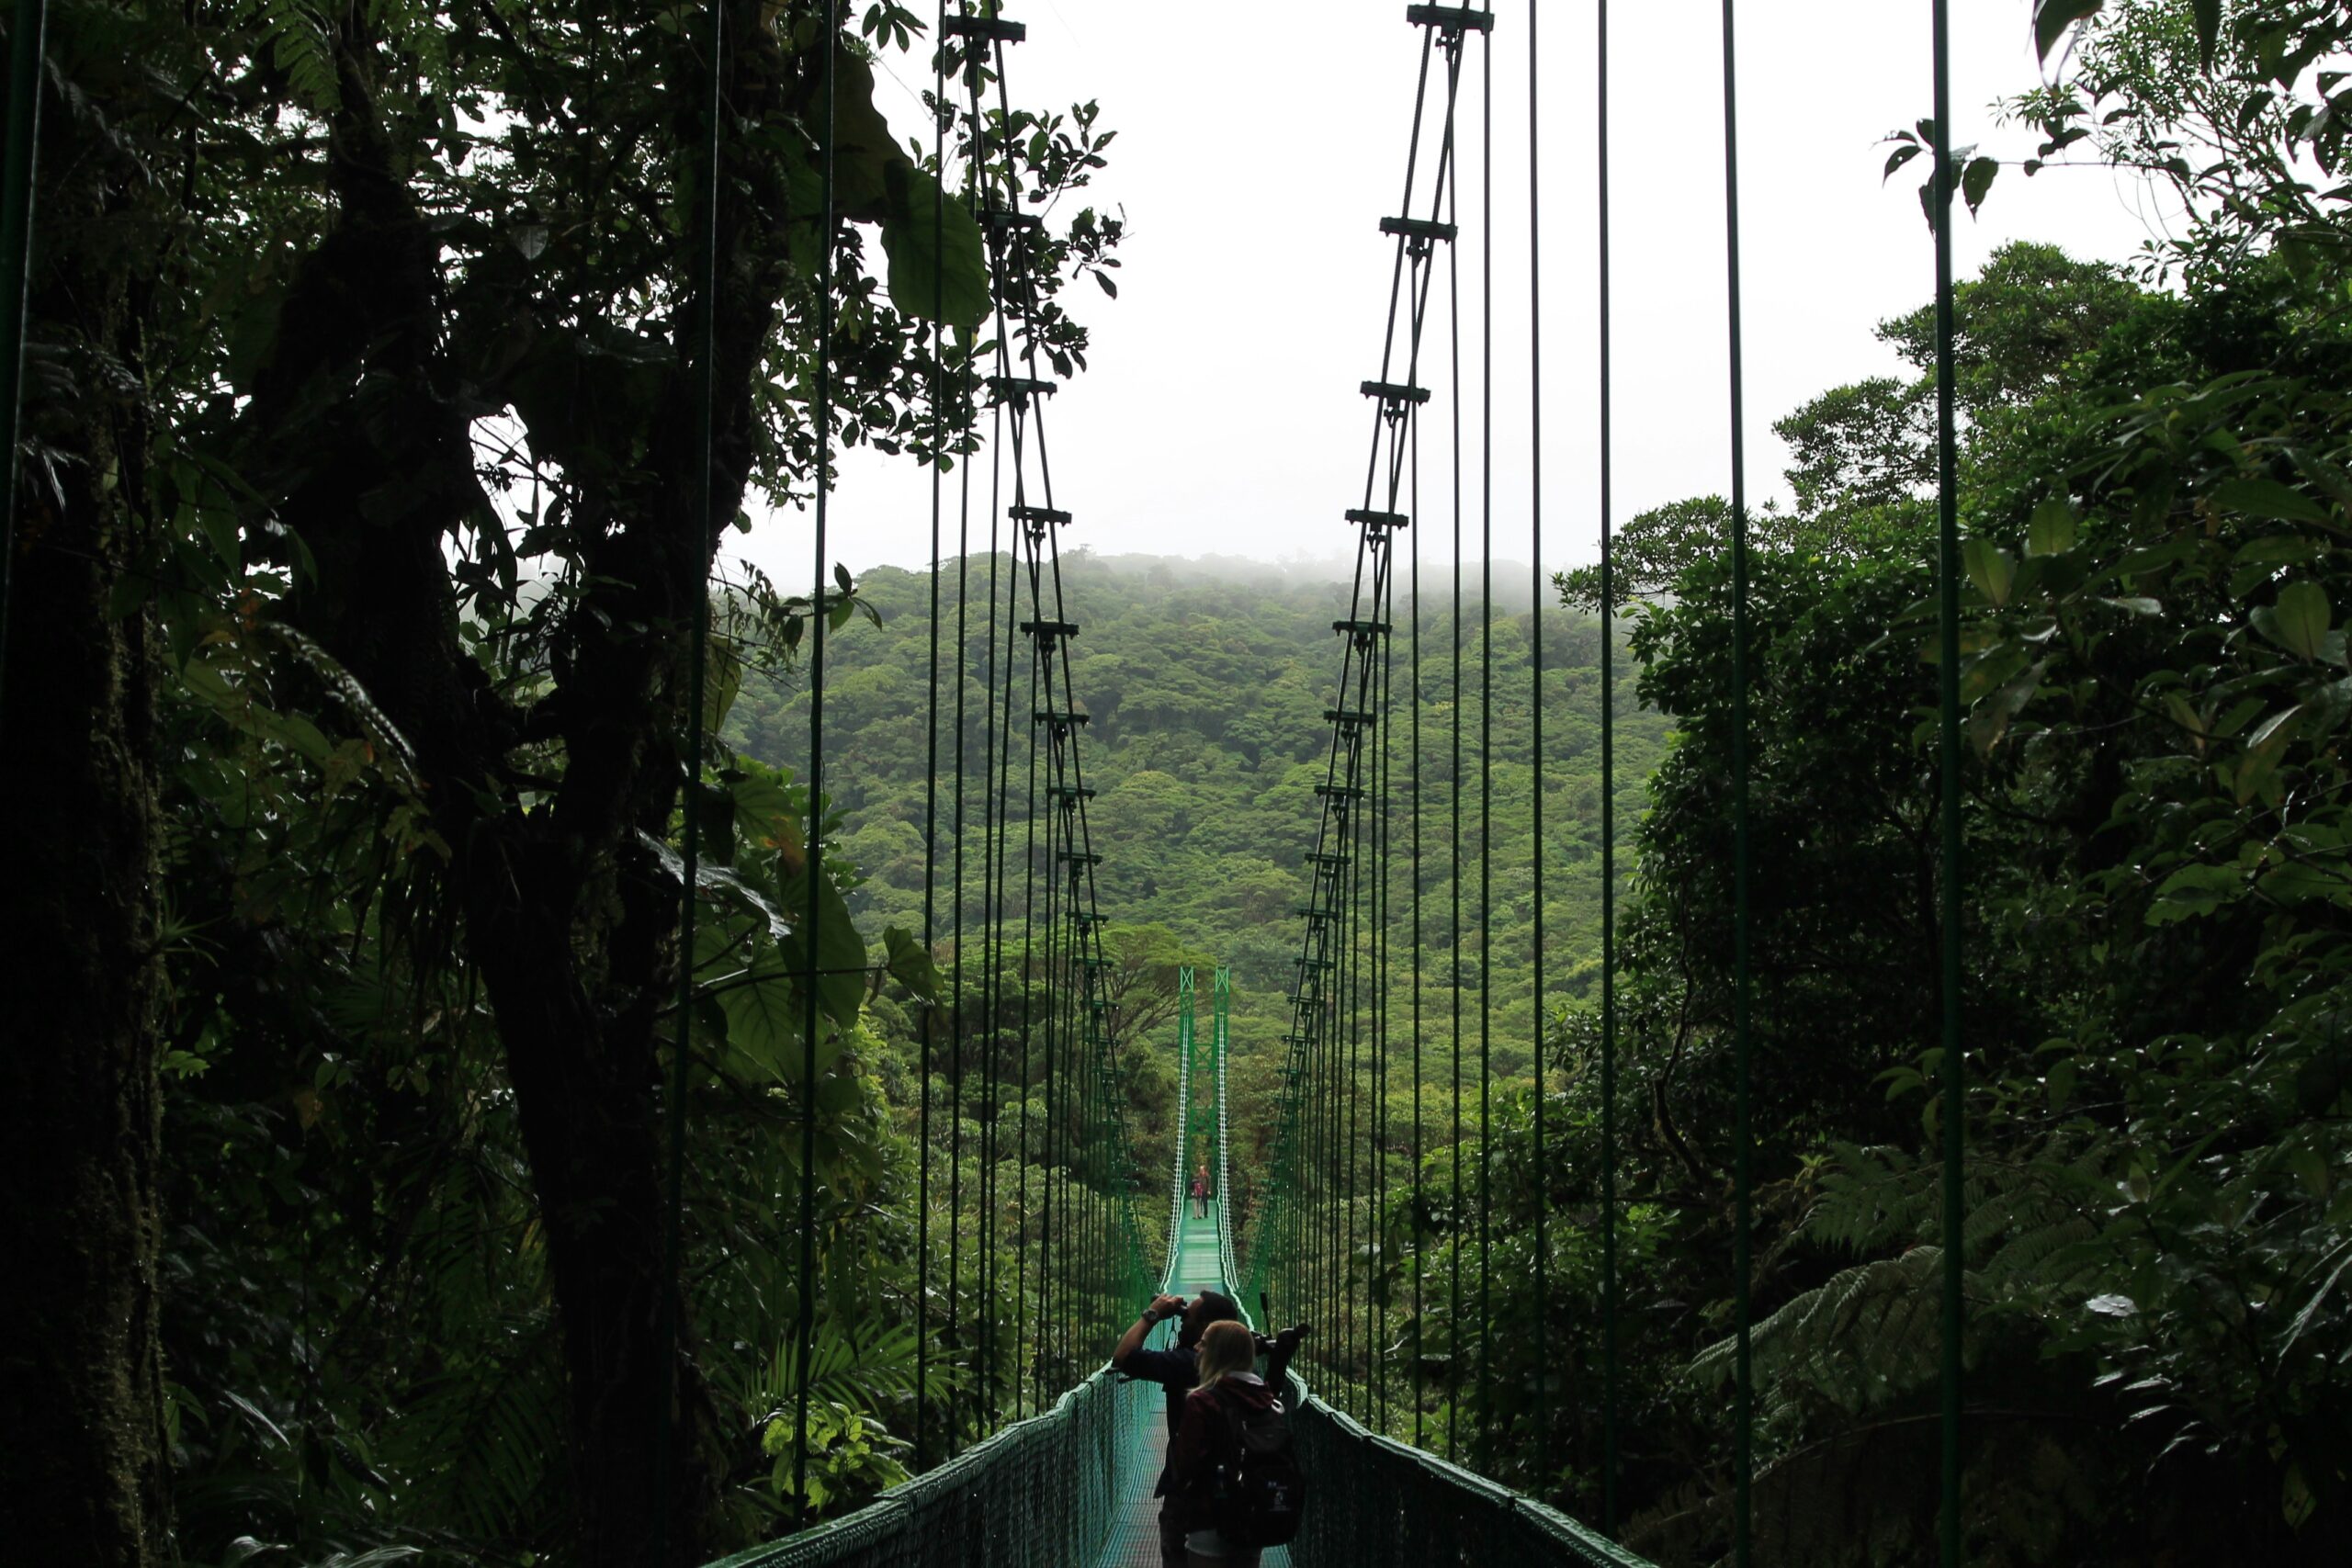 These are the most popular natural attractions in Costa Rica that travelers should visit in April. pictured: a large bridge in a national park of Costa Rica